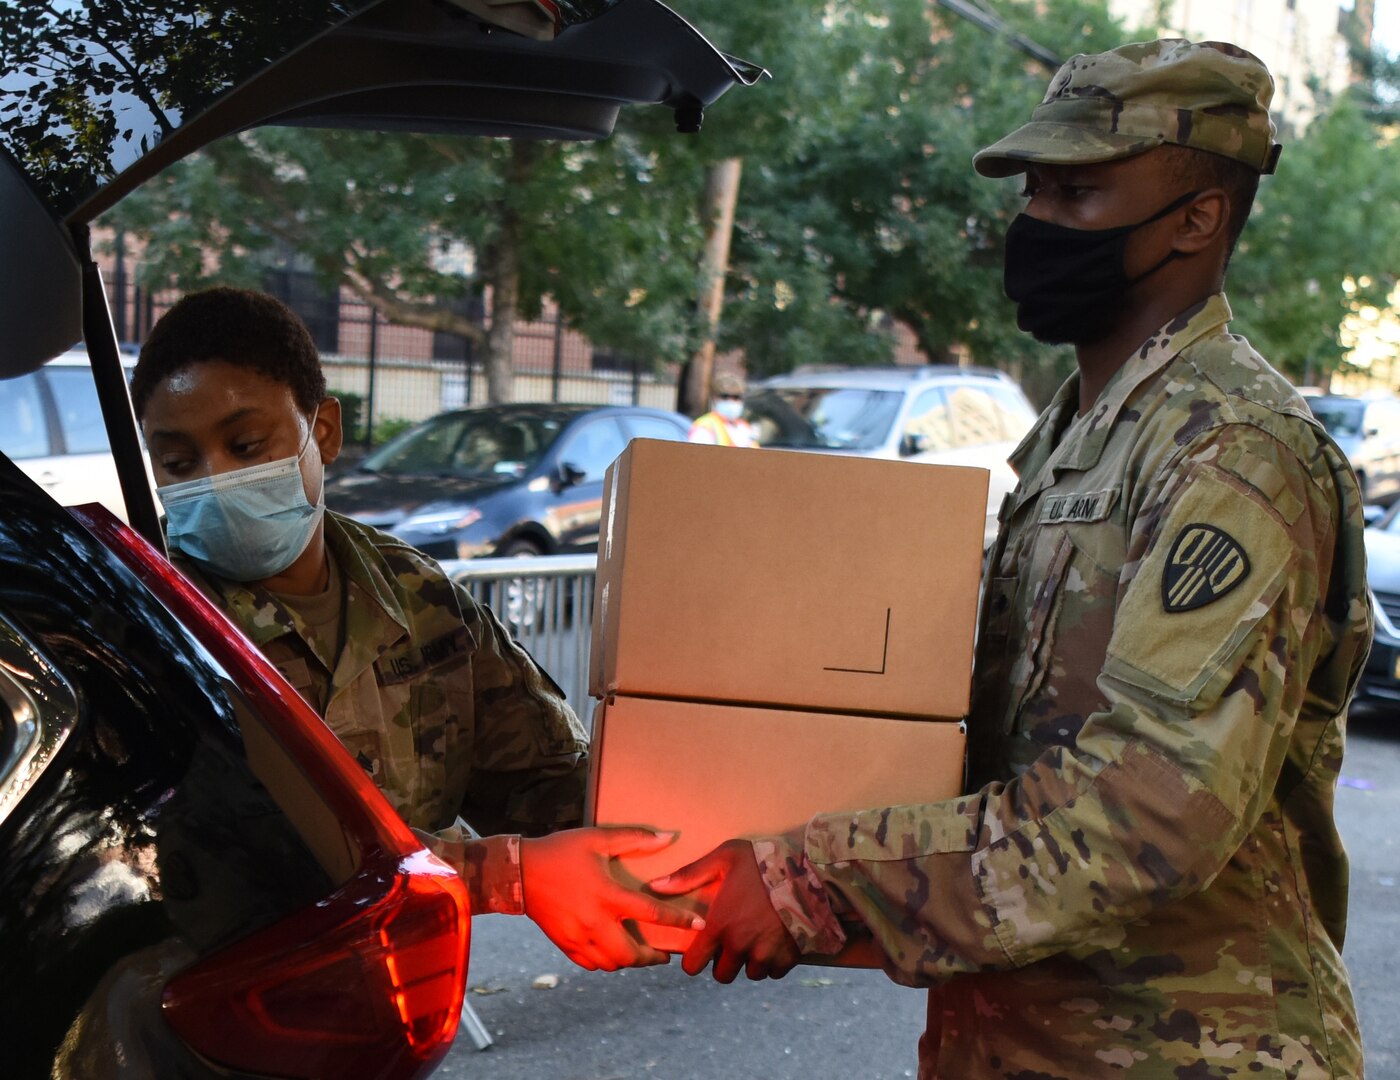 Sgt. Thalia Santos from Yonkers, N.Y., left, and Spc. Kirt Joseph from Brentwood, N.Y., members of the New York Army National Guard, load boxed, packaged food, into a vehicle at a food distribution site in the Bronx, New York Aug. 5, 2020.